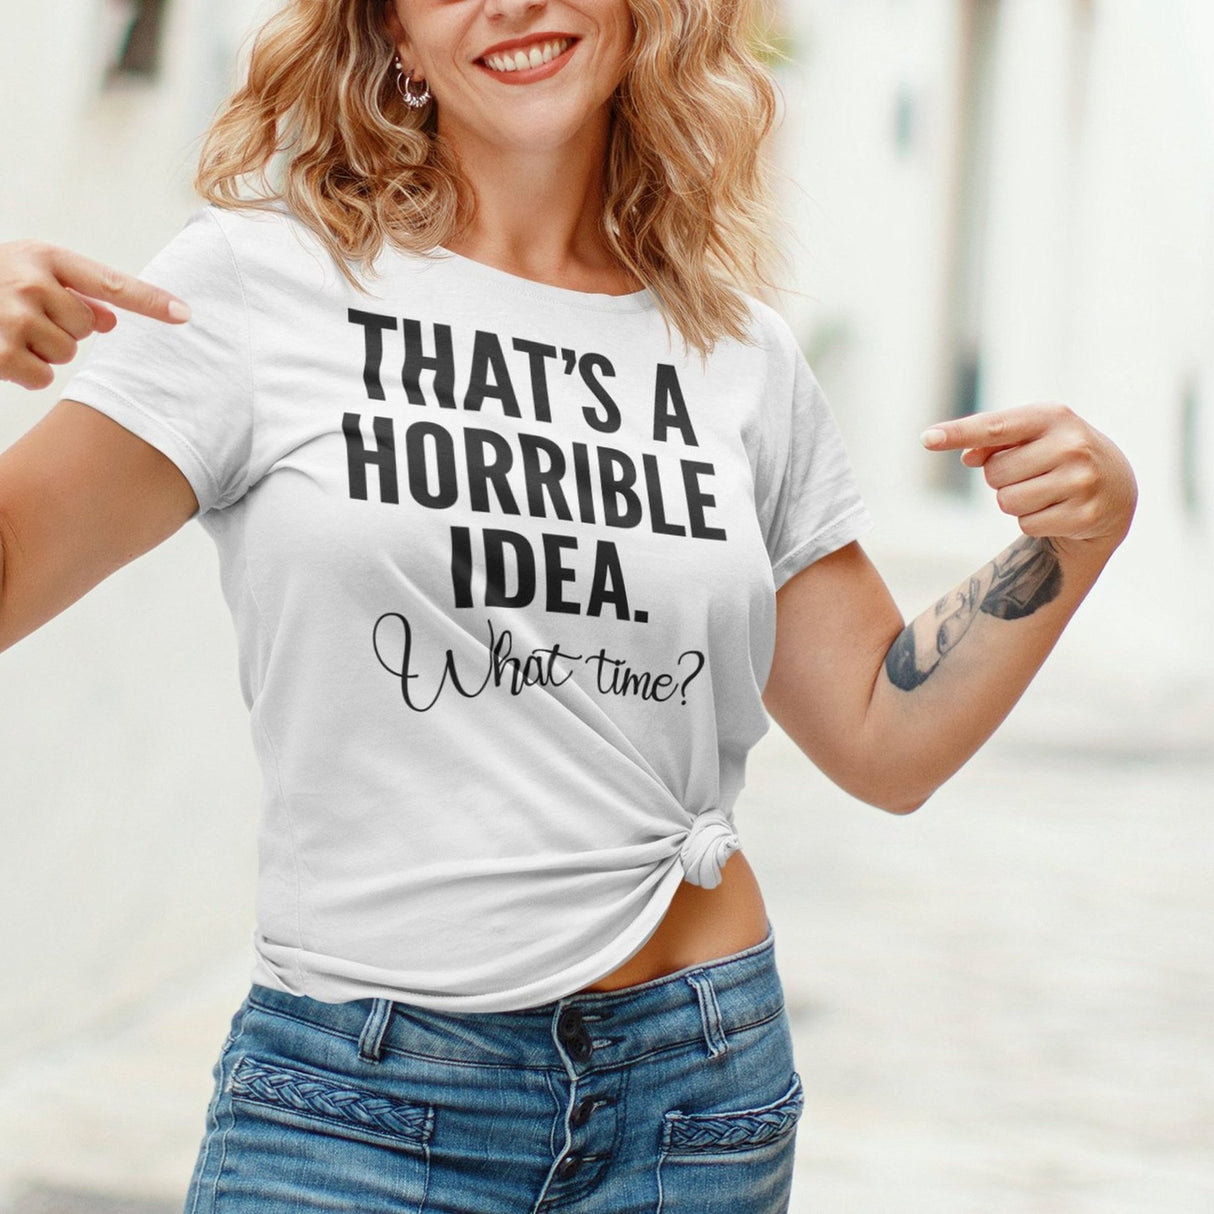 thats-a-horrible-idea-what-time-horrible-tee-idea-t-shirt-text-only-tee-funny-t-shirt-life-tee#color_white